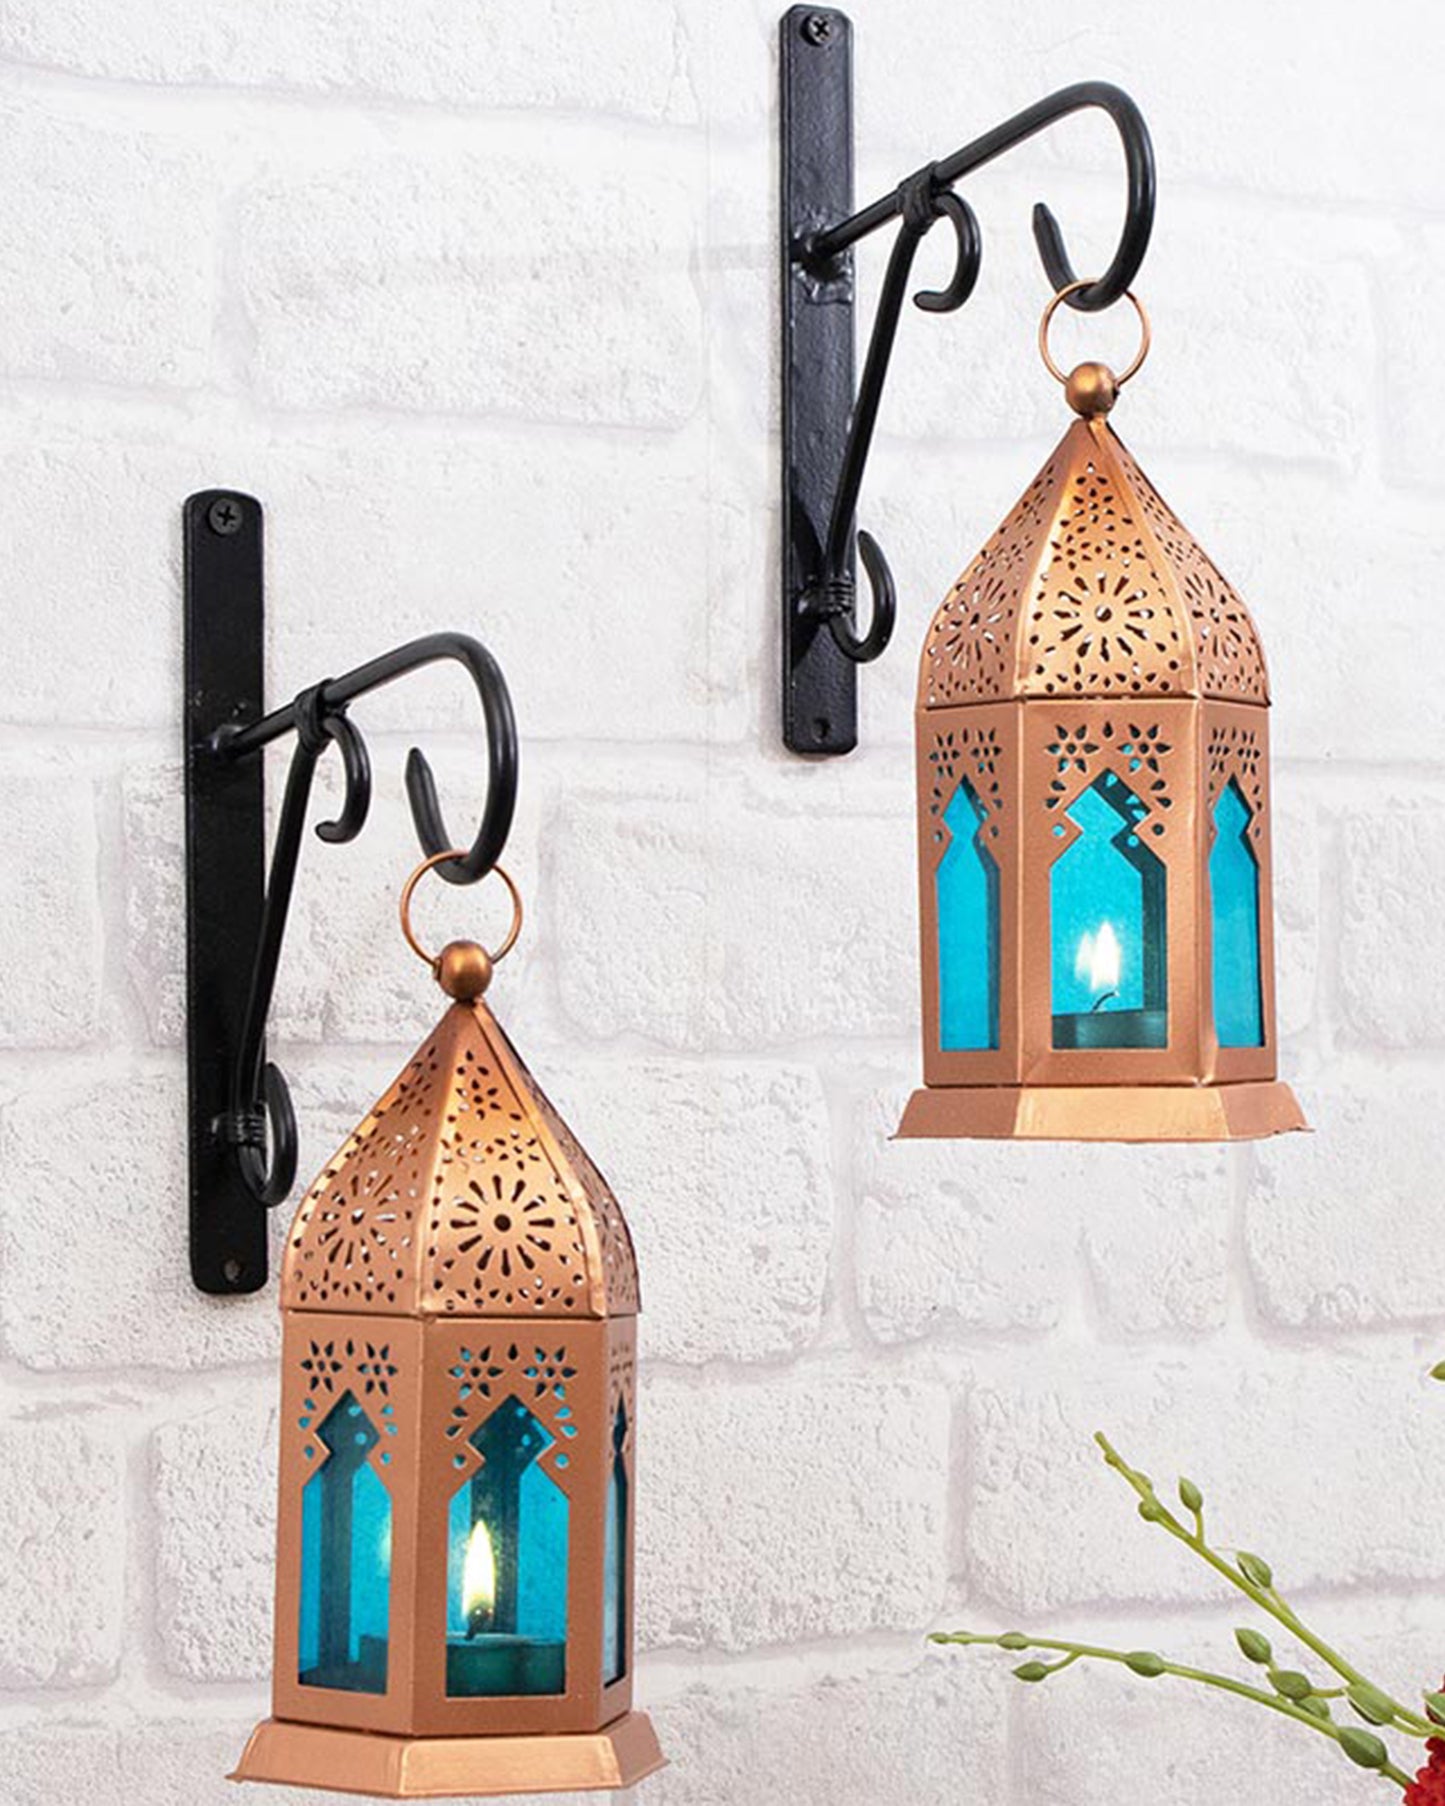 Wall Metal Decorative Antique Copper Finish Moroccan Lantern Candle Holder, Set of 2, Tealight Hanging Home Office Decor with Wall Hook